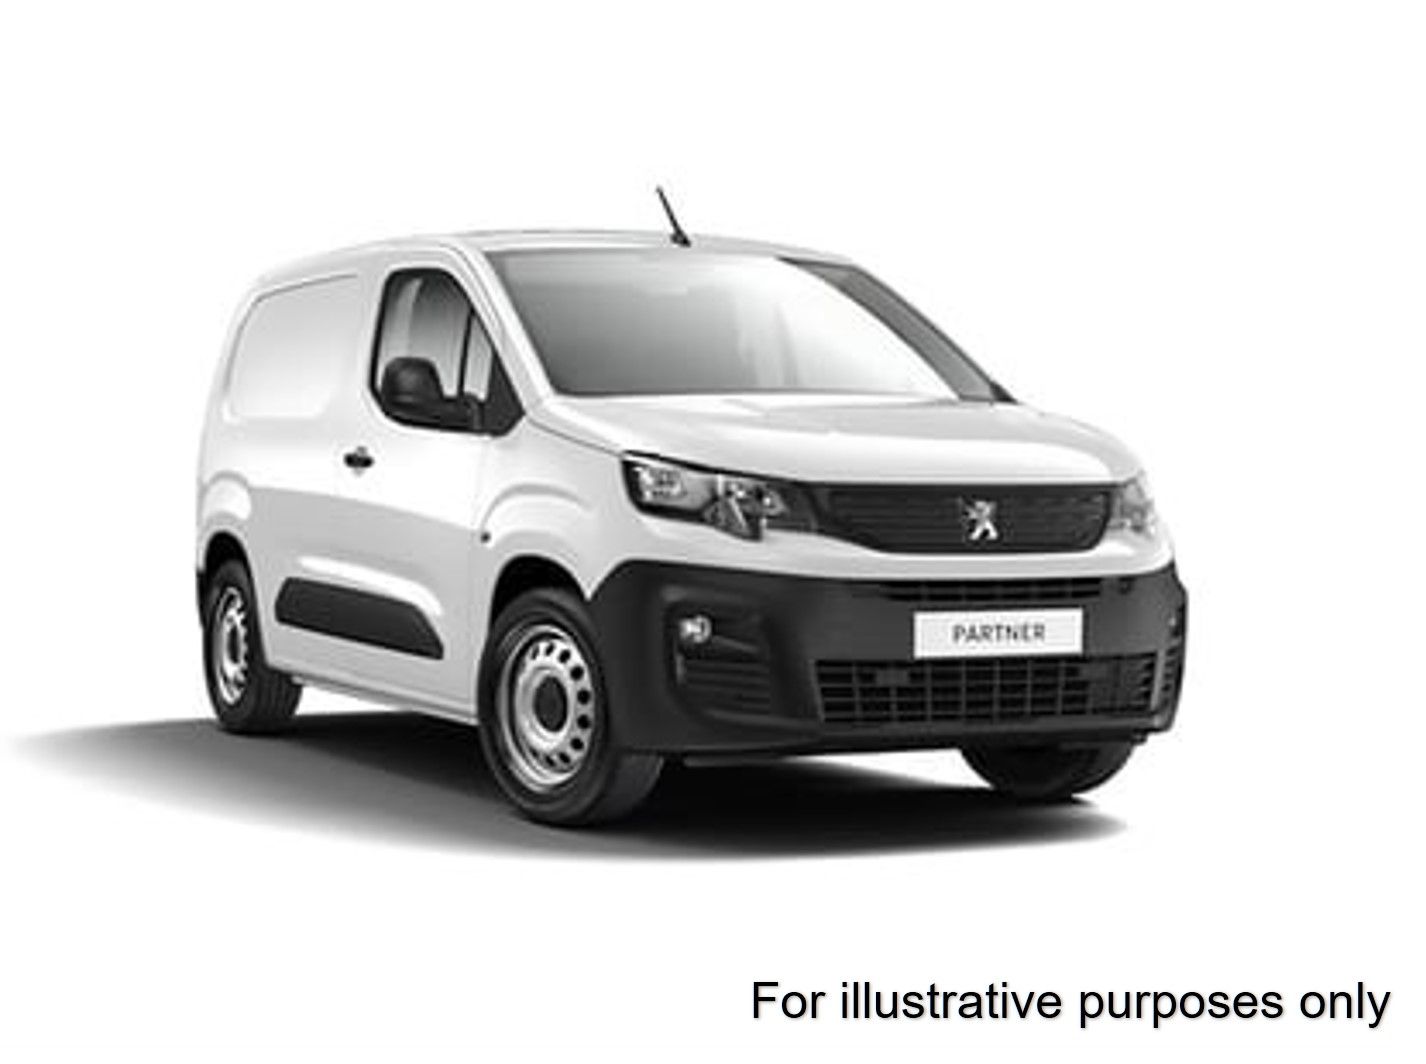 2017 Peugeot Partner L1 850 1.6 BLUEHDI 100 PROFESSIONAL (NON S/S)EURO 6 (NV17YGH)